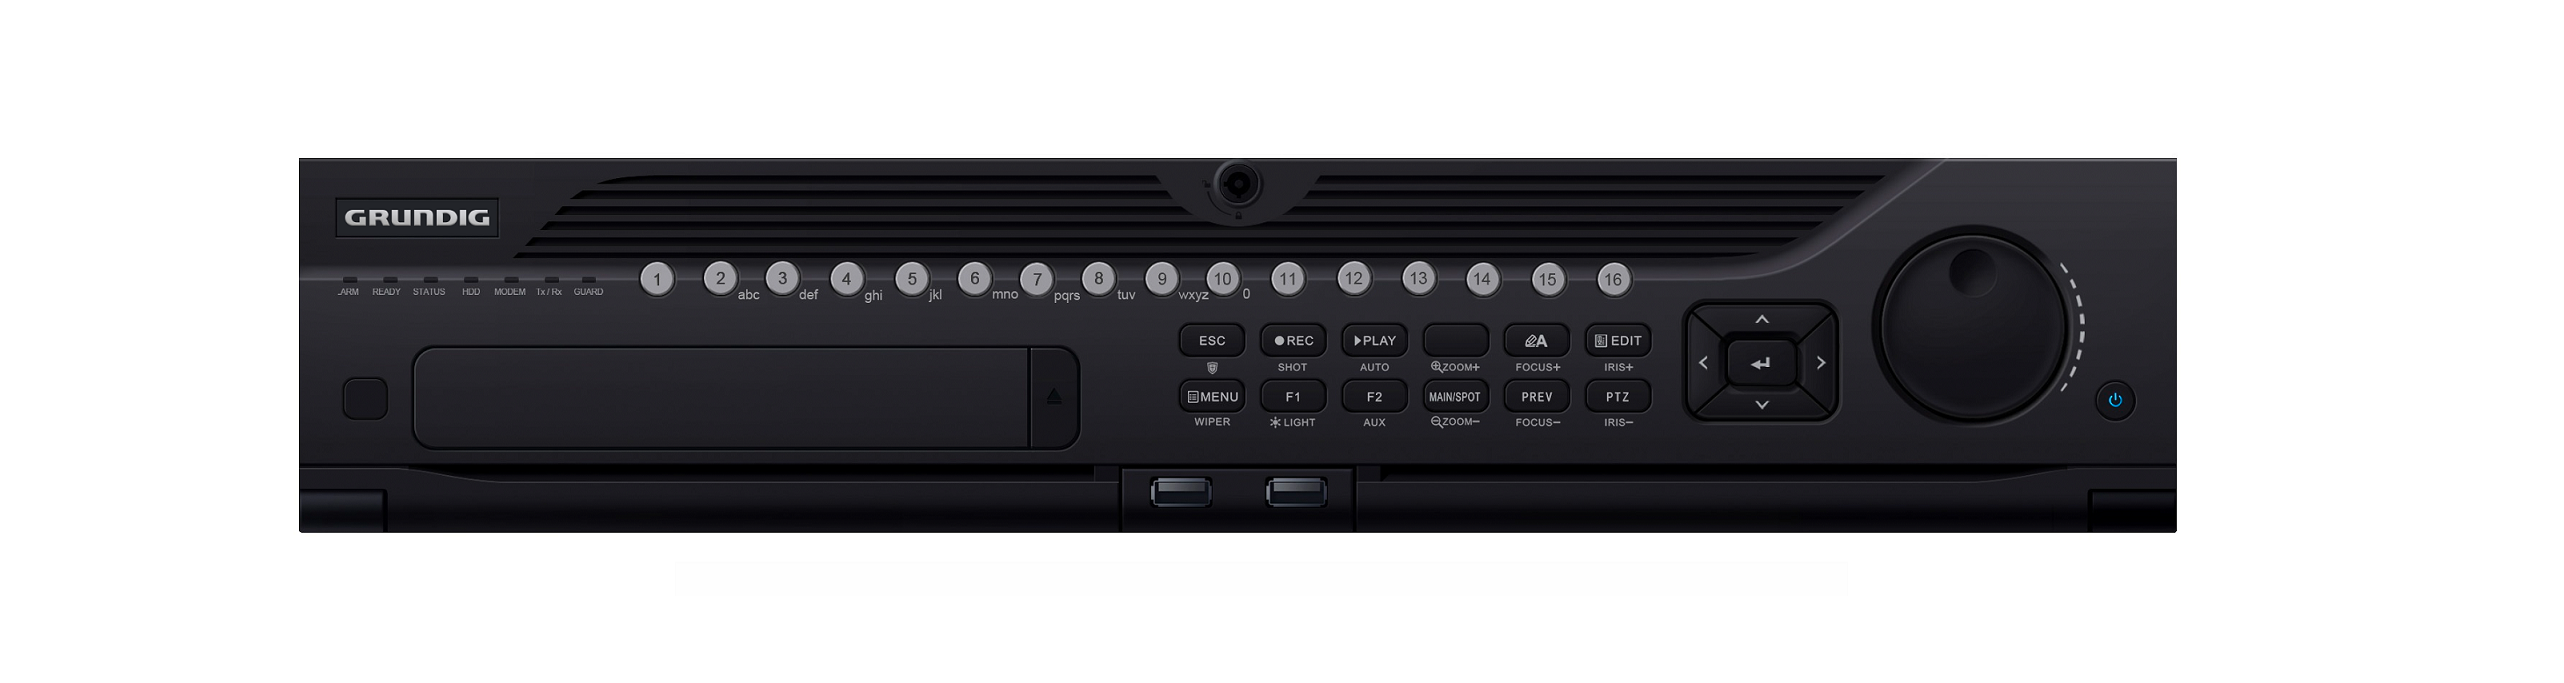 64 Ch. Network Video Recorder